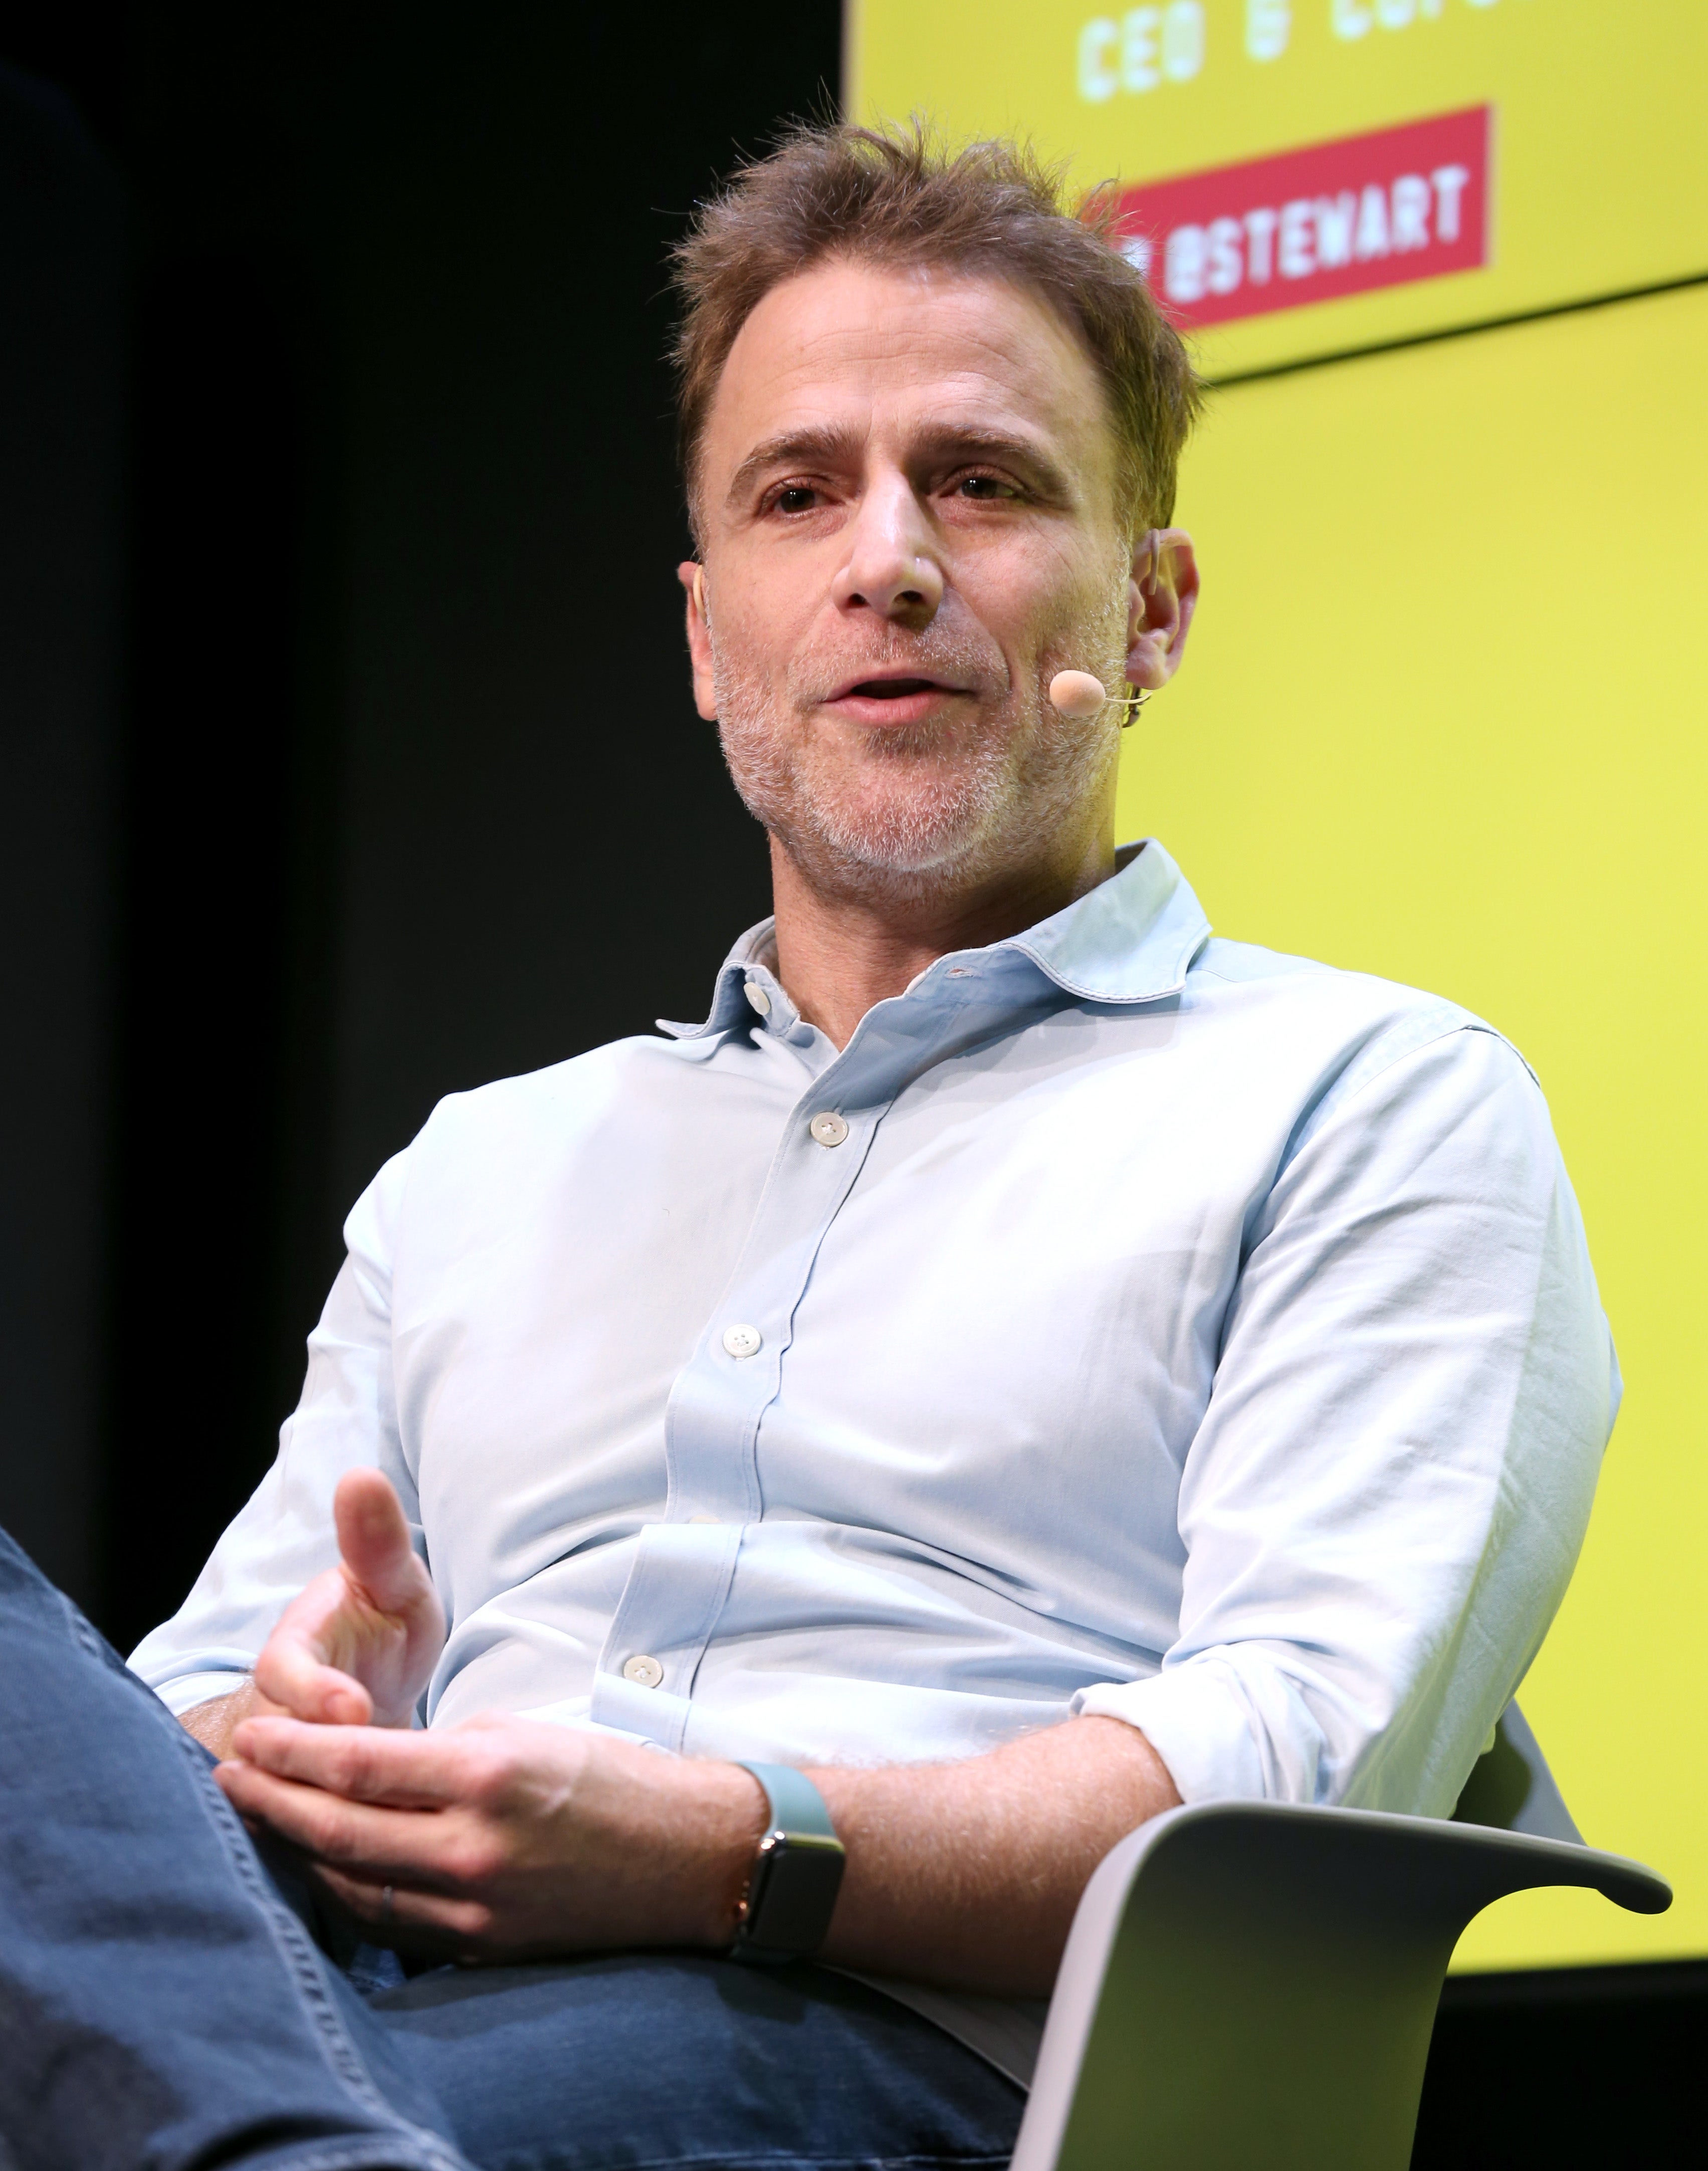 Slack CEO Stewart Butterfield speaking on stage at the Wired25 Summit in 2019